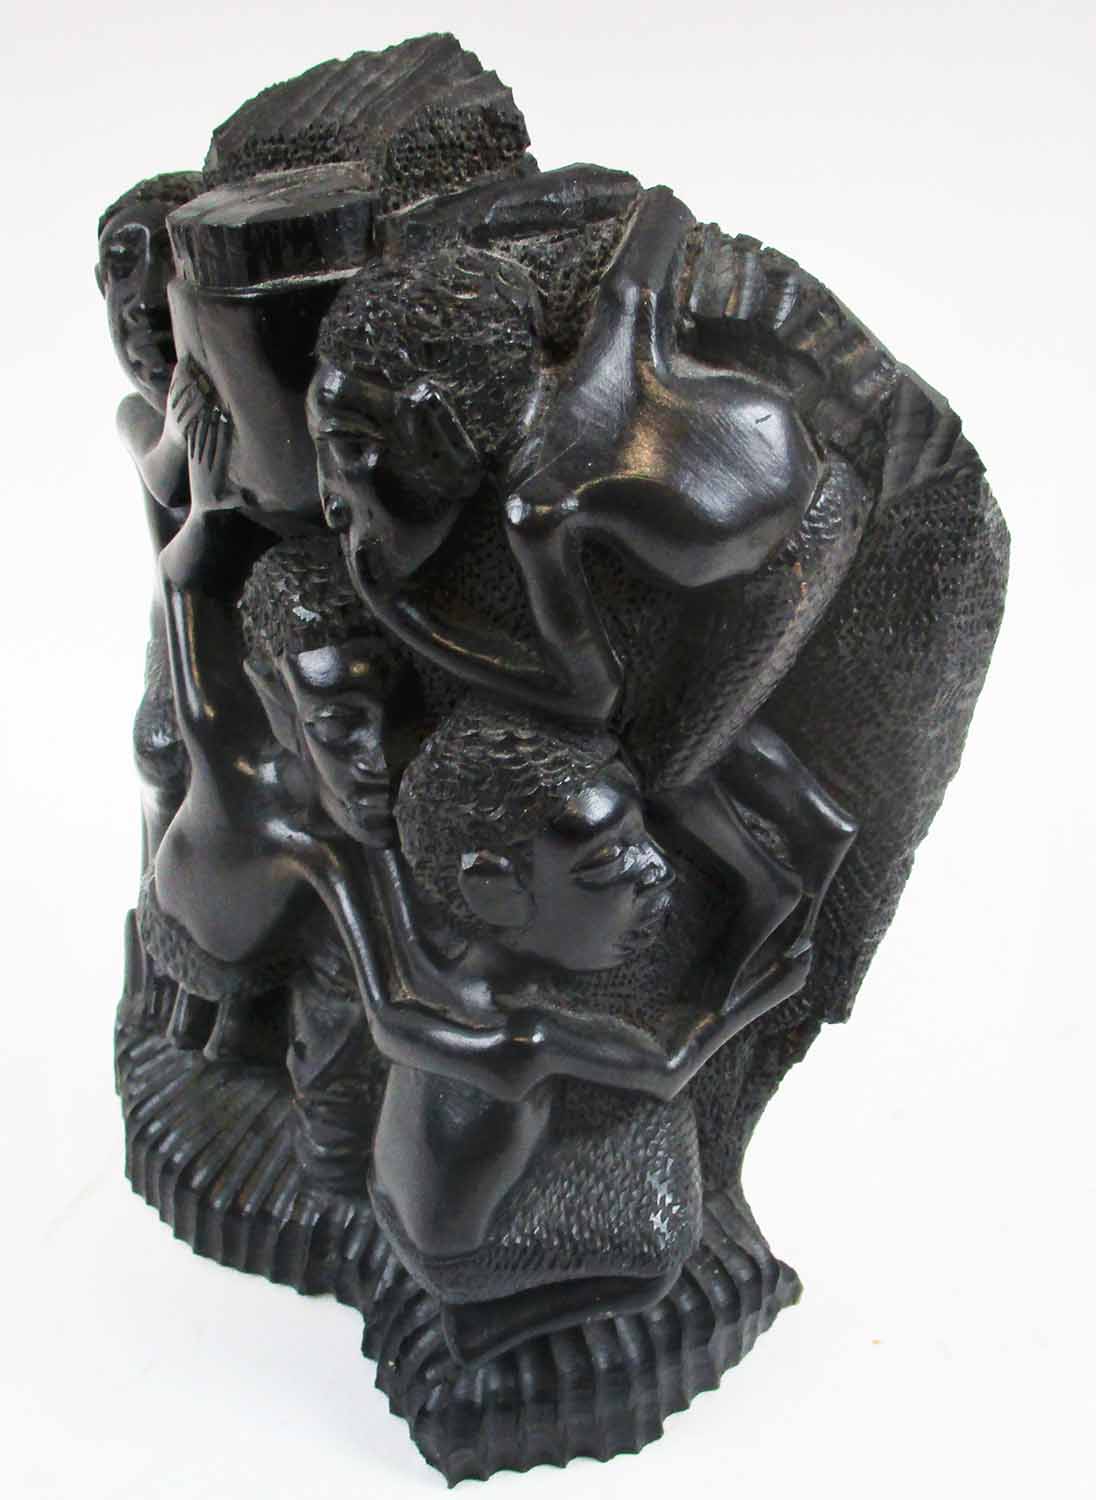 TRIBAL ARTS - MAKONDE FIGURAL WOOD CARVING, 22cm H x 17cm overall. - Image 3 of 4